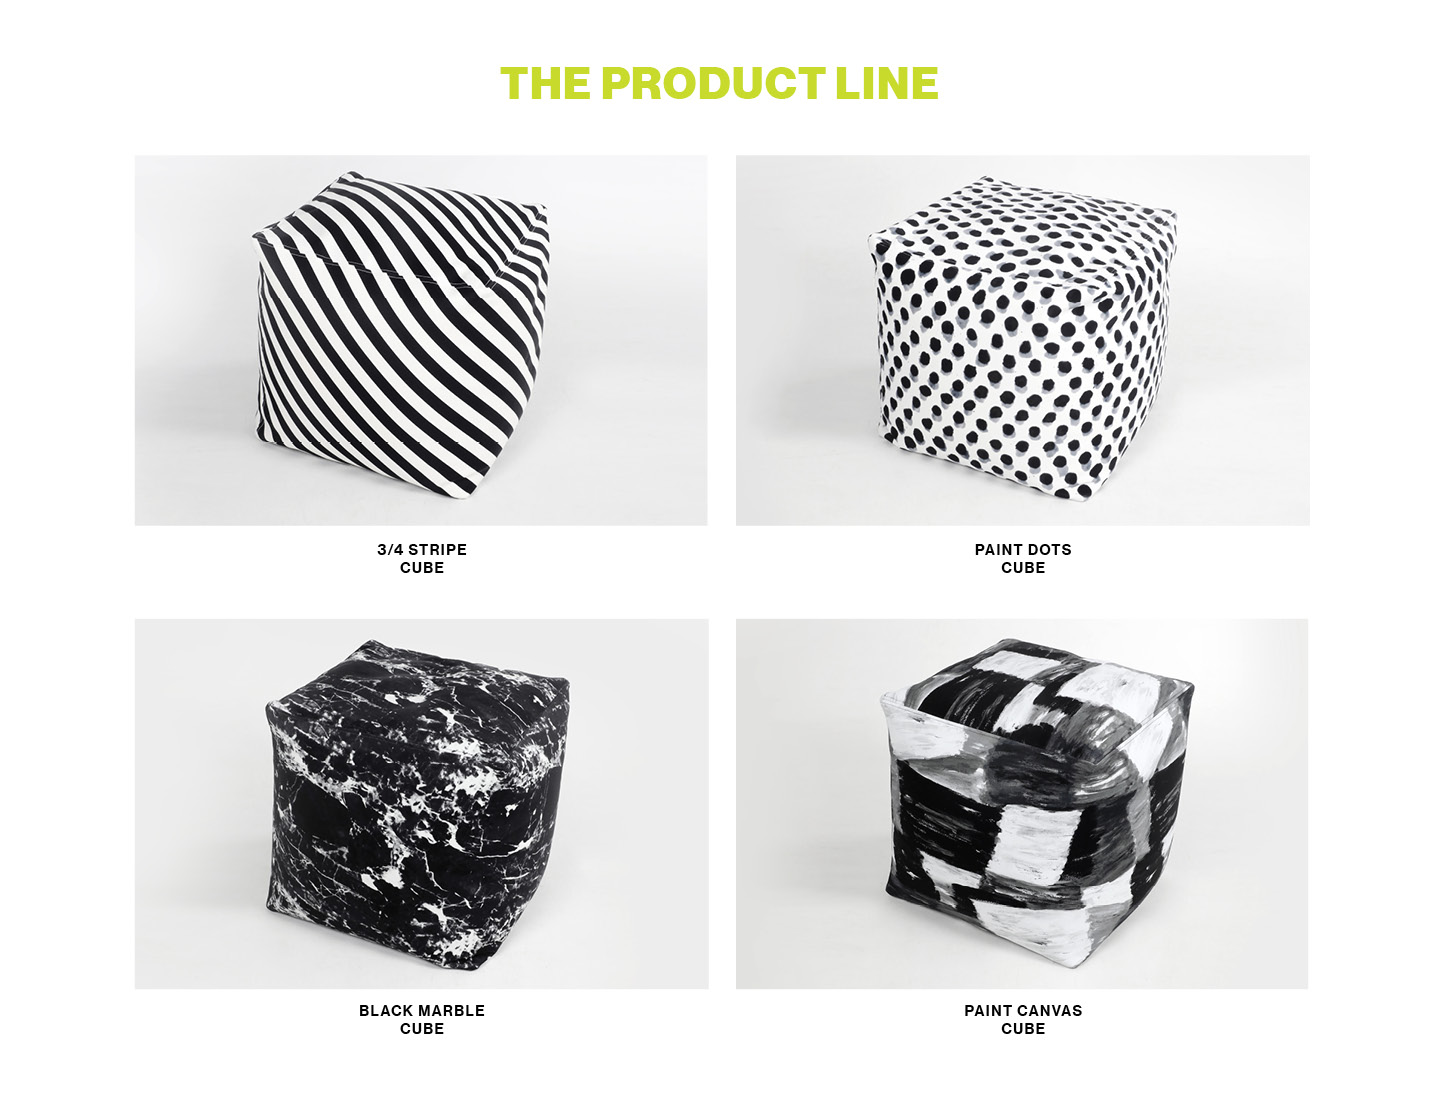 The Cube product line